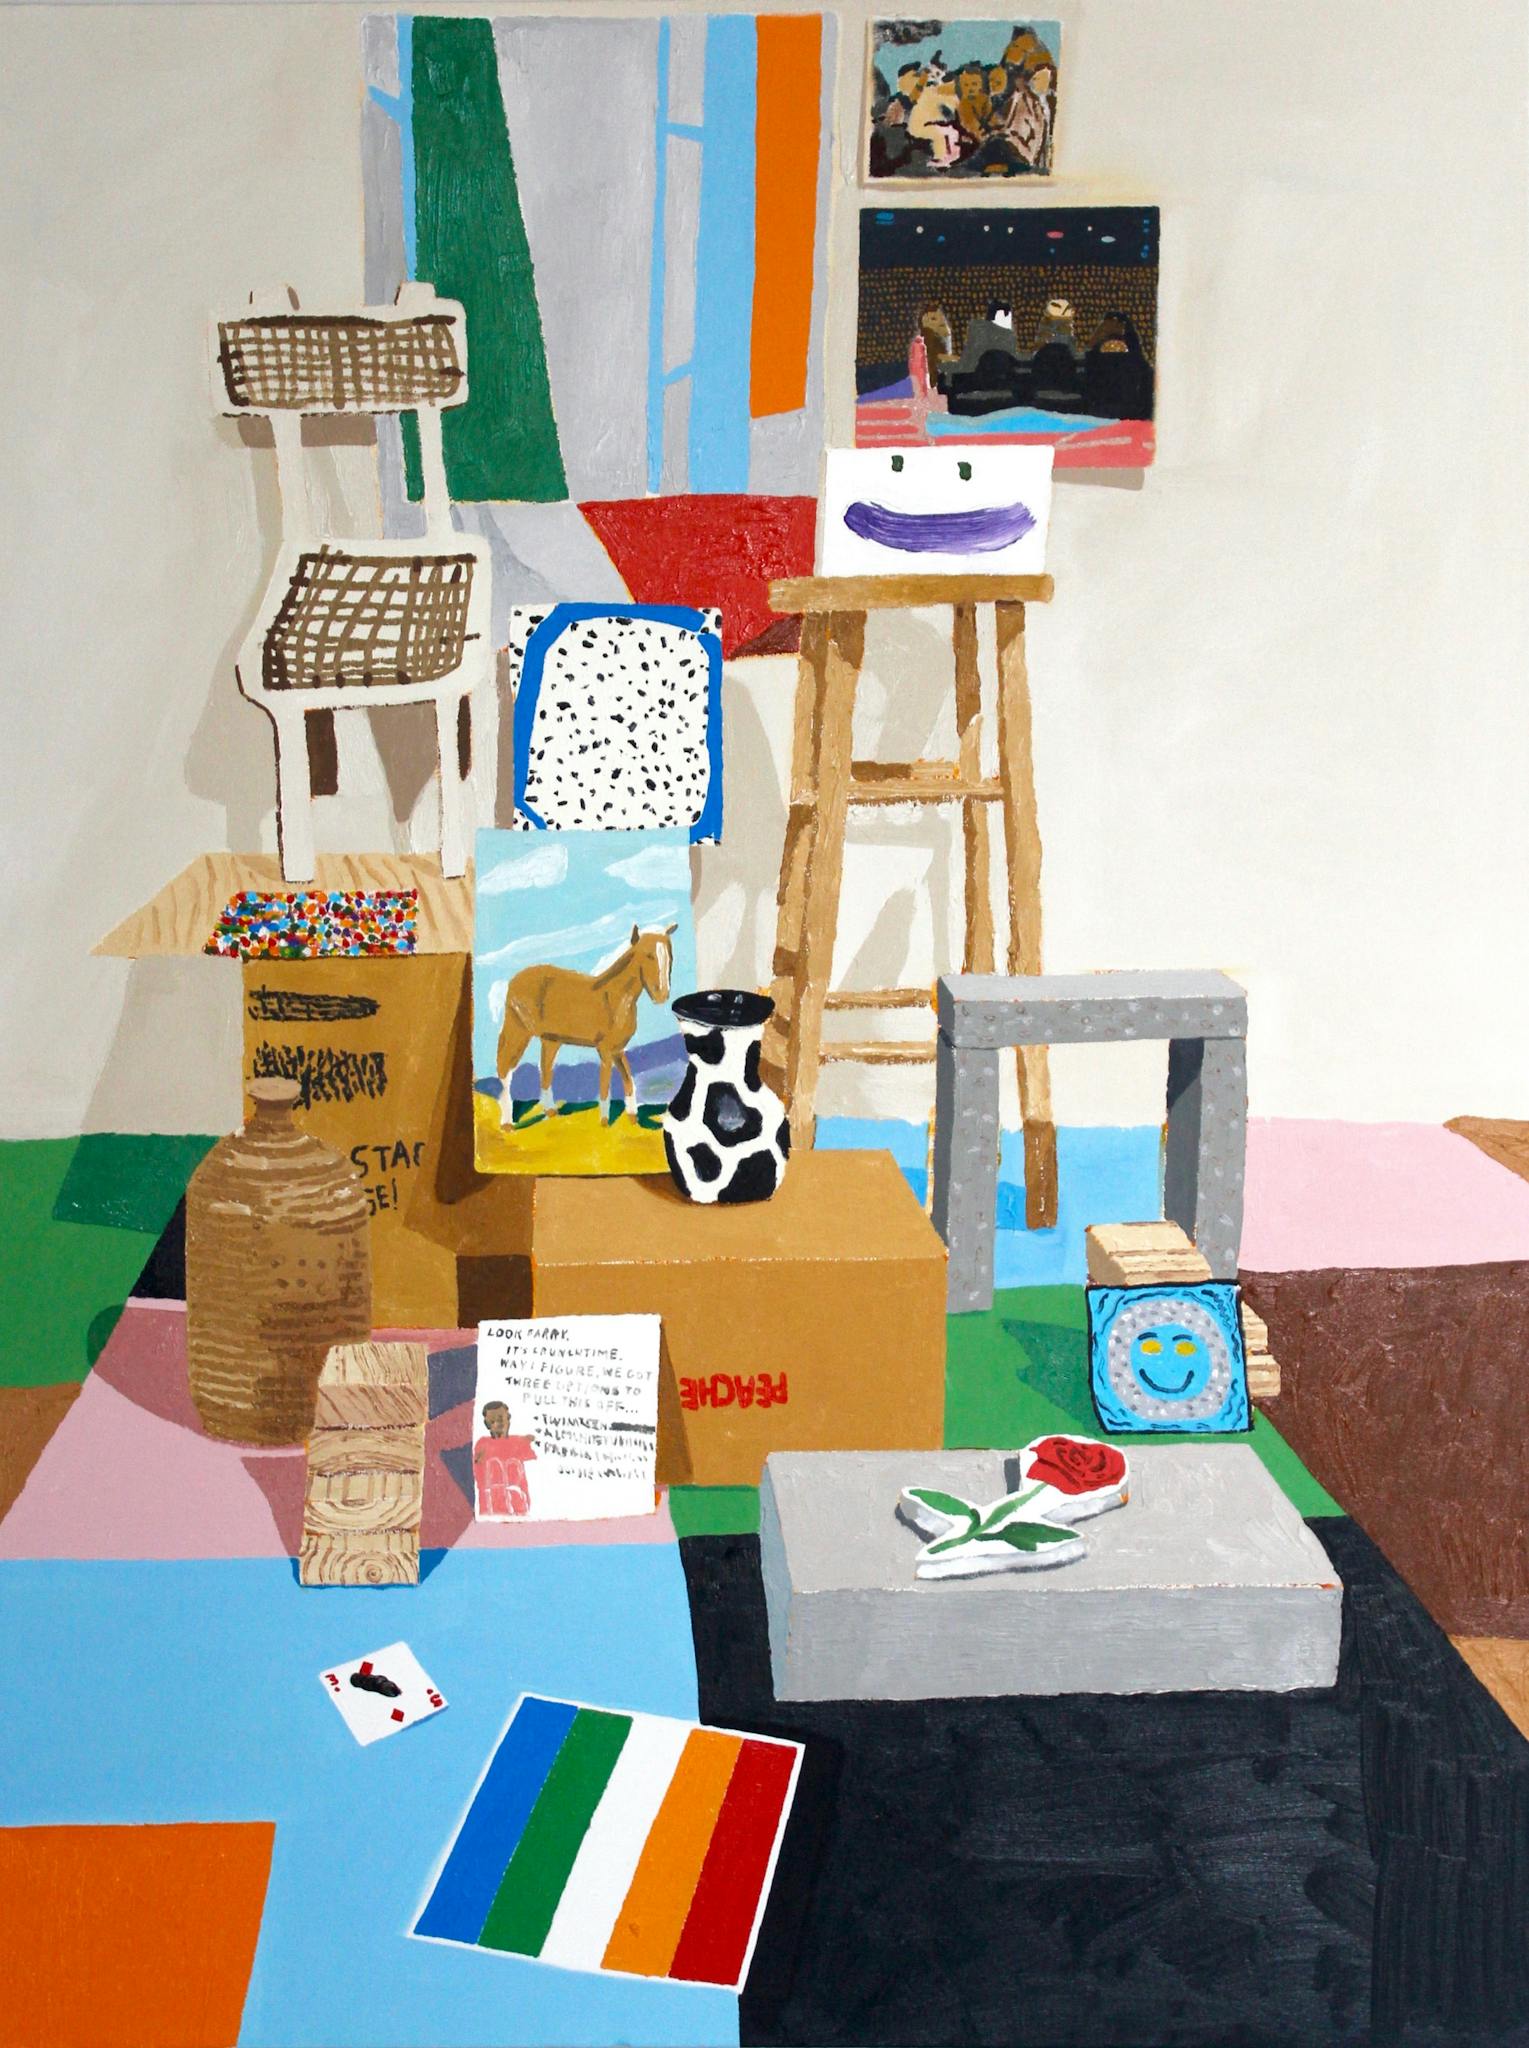 Bradley Kerl's painting of boxes, stools, and mundane household objects.